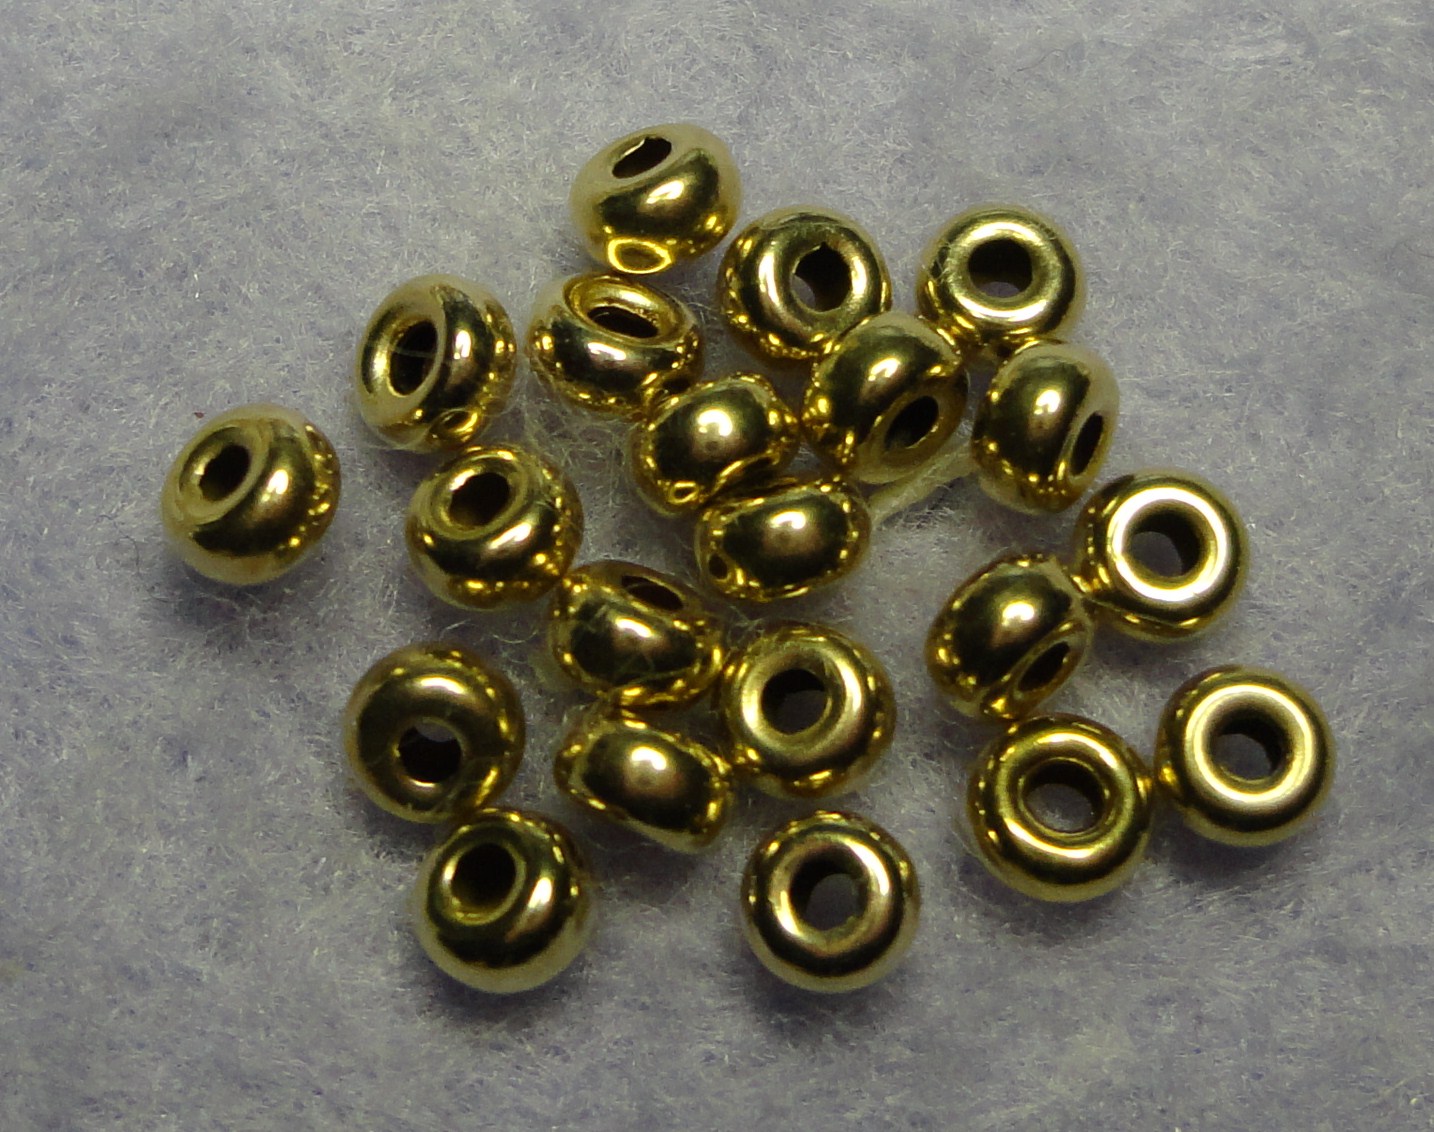 BEADS 14KT SOLID GOLD ROUNDEL 4MMX2MM 10 PCS